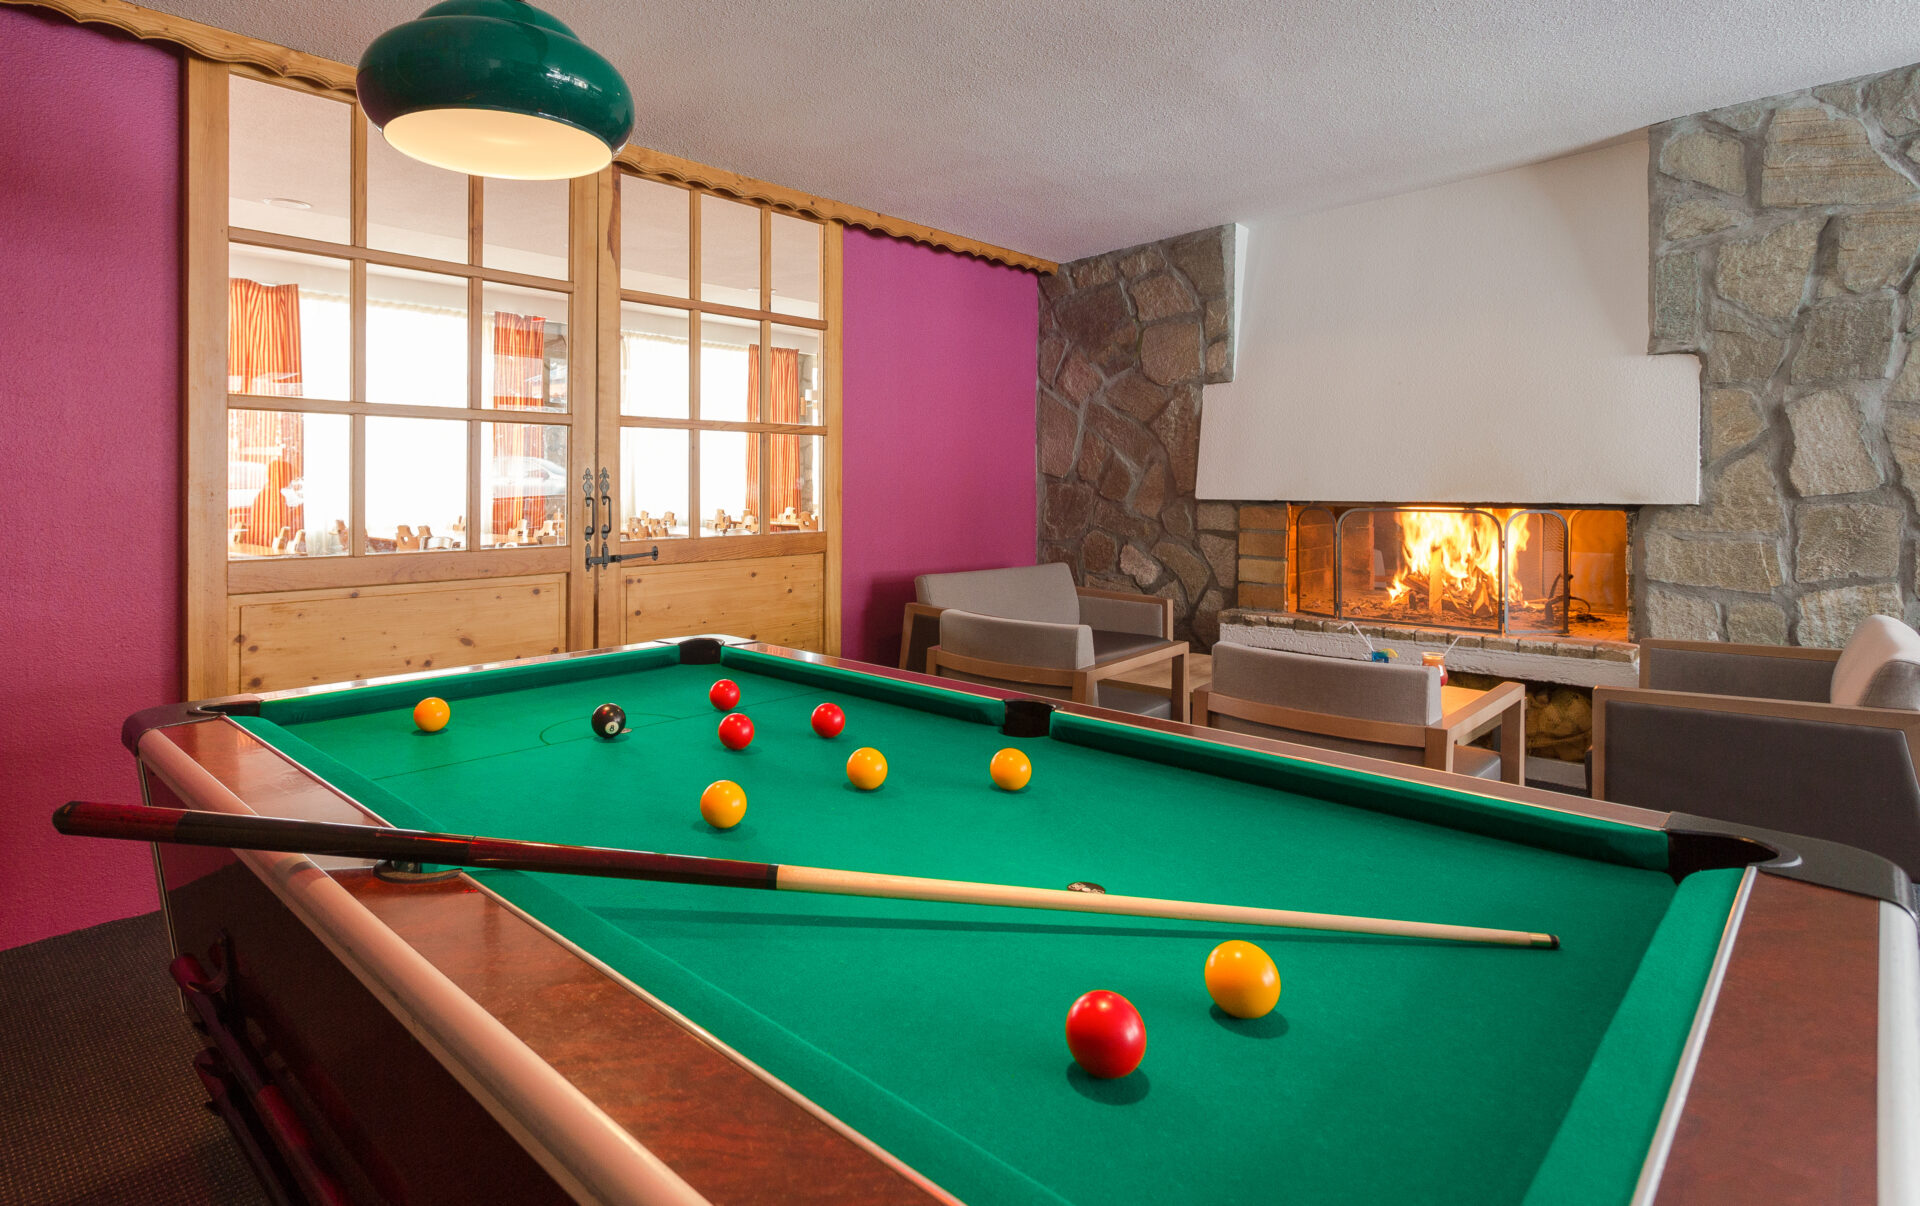 An image of a pool table at the residence